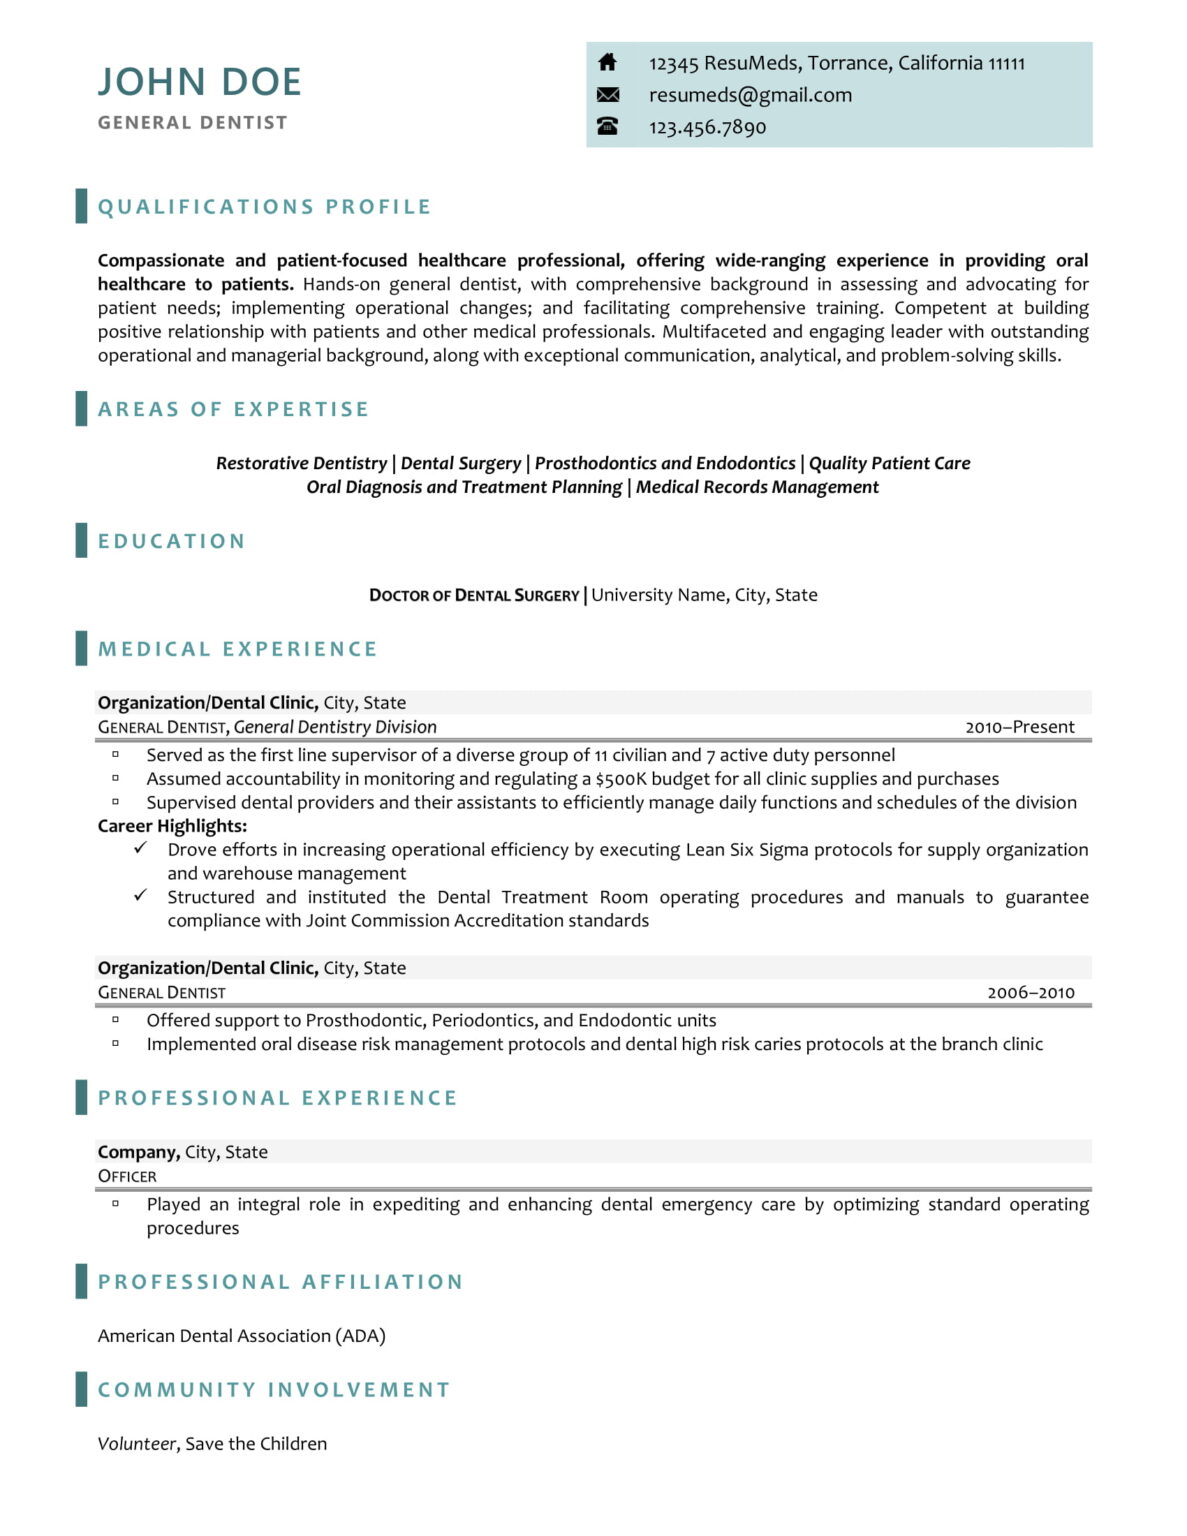 Dentist Resume Your Ultimate Guide in Writing One to Snag that Job